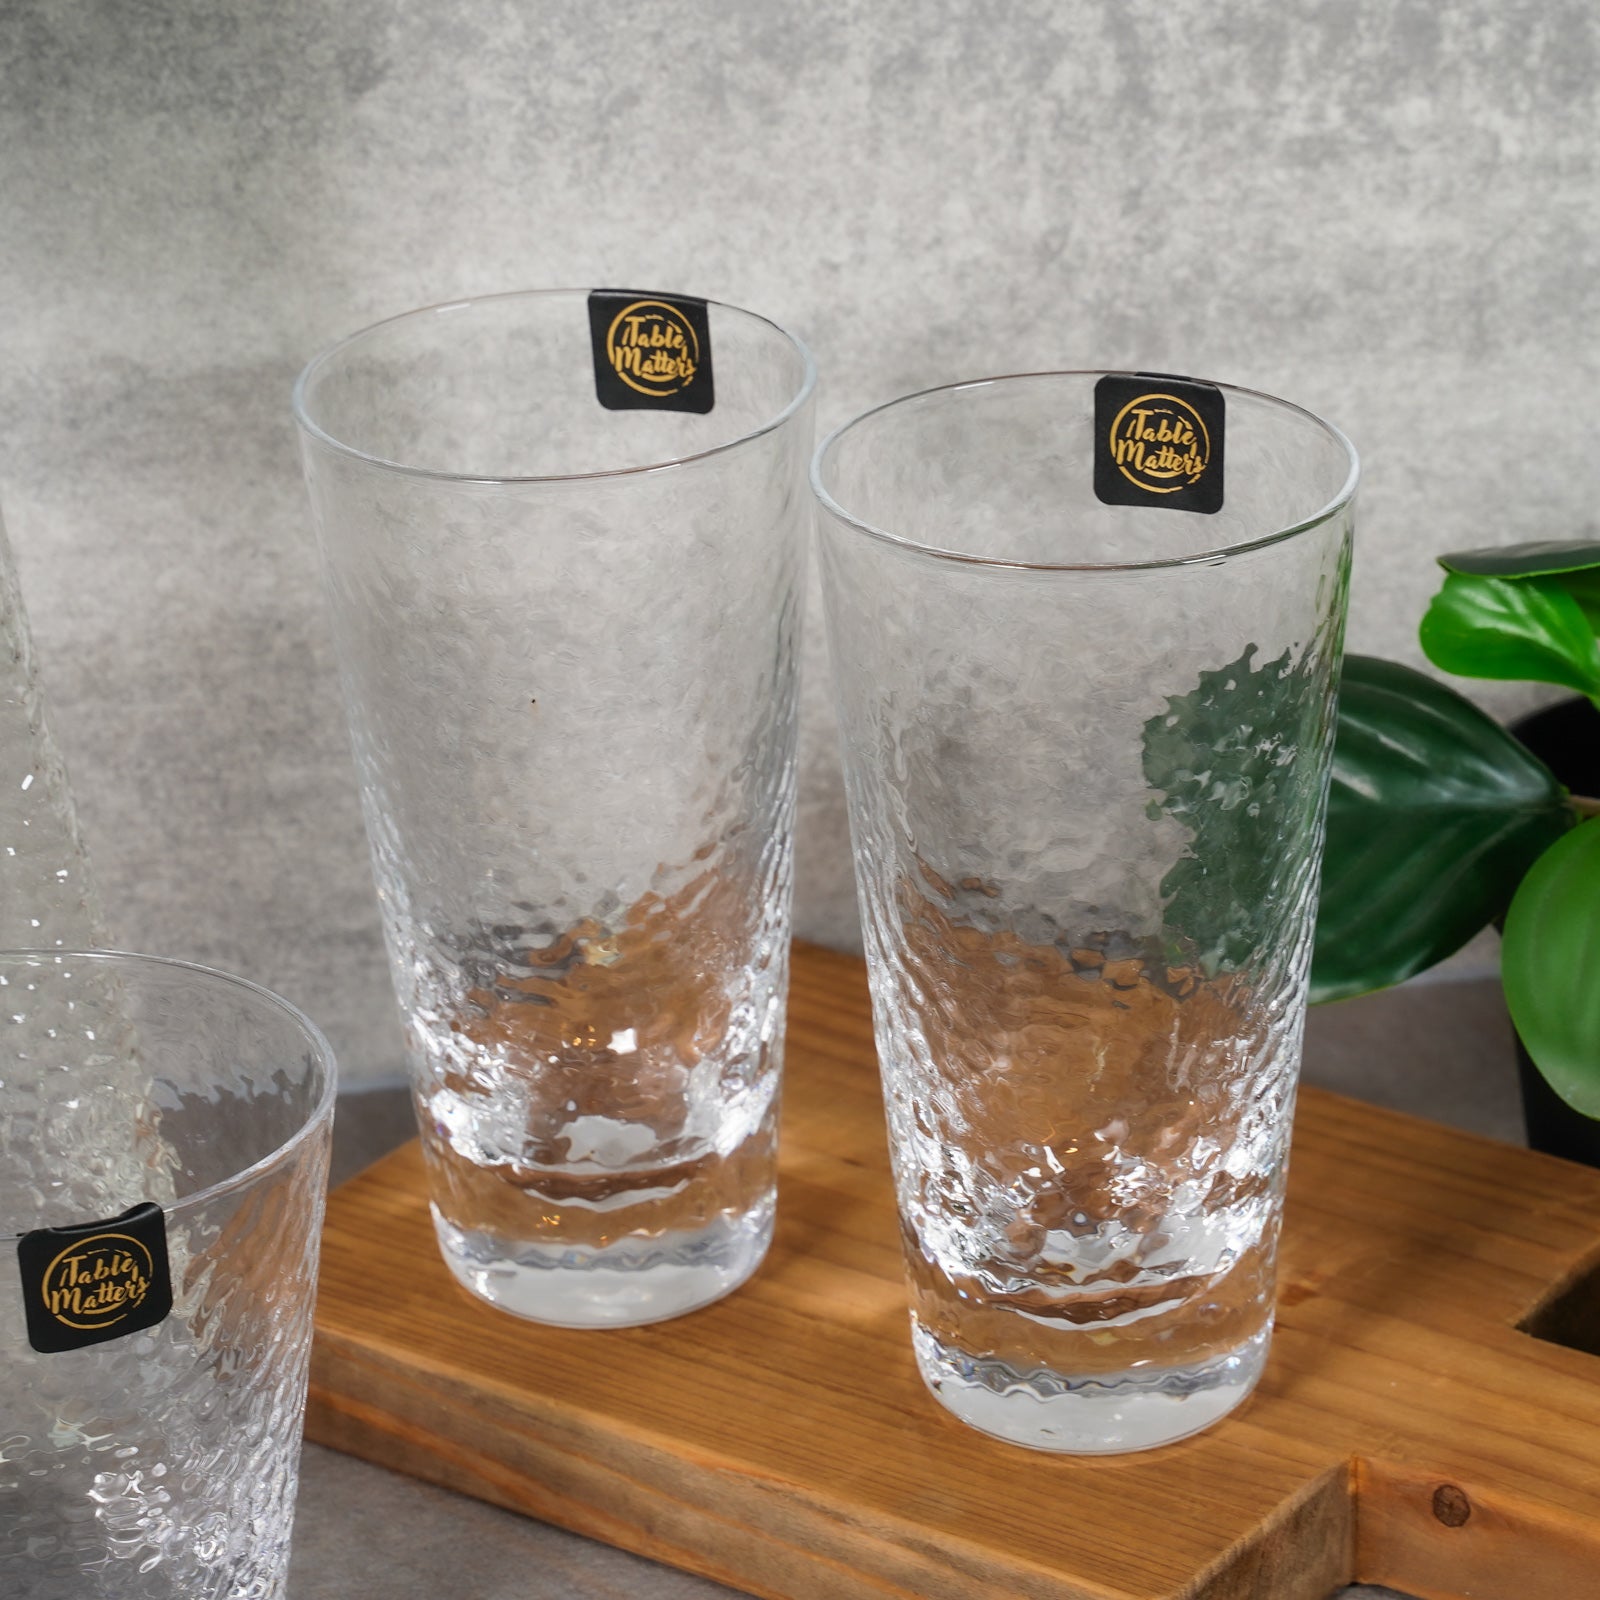 Bundle Deal for 2 - Tsuchi Drinking Glass and Jug - Set of 5